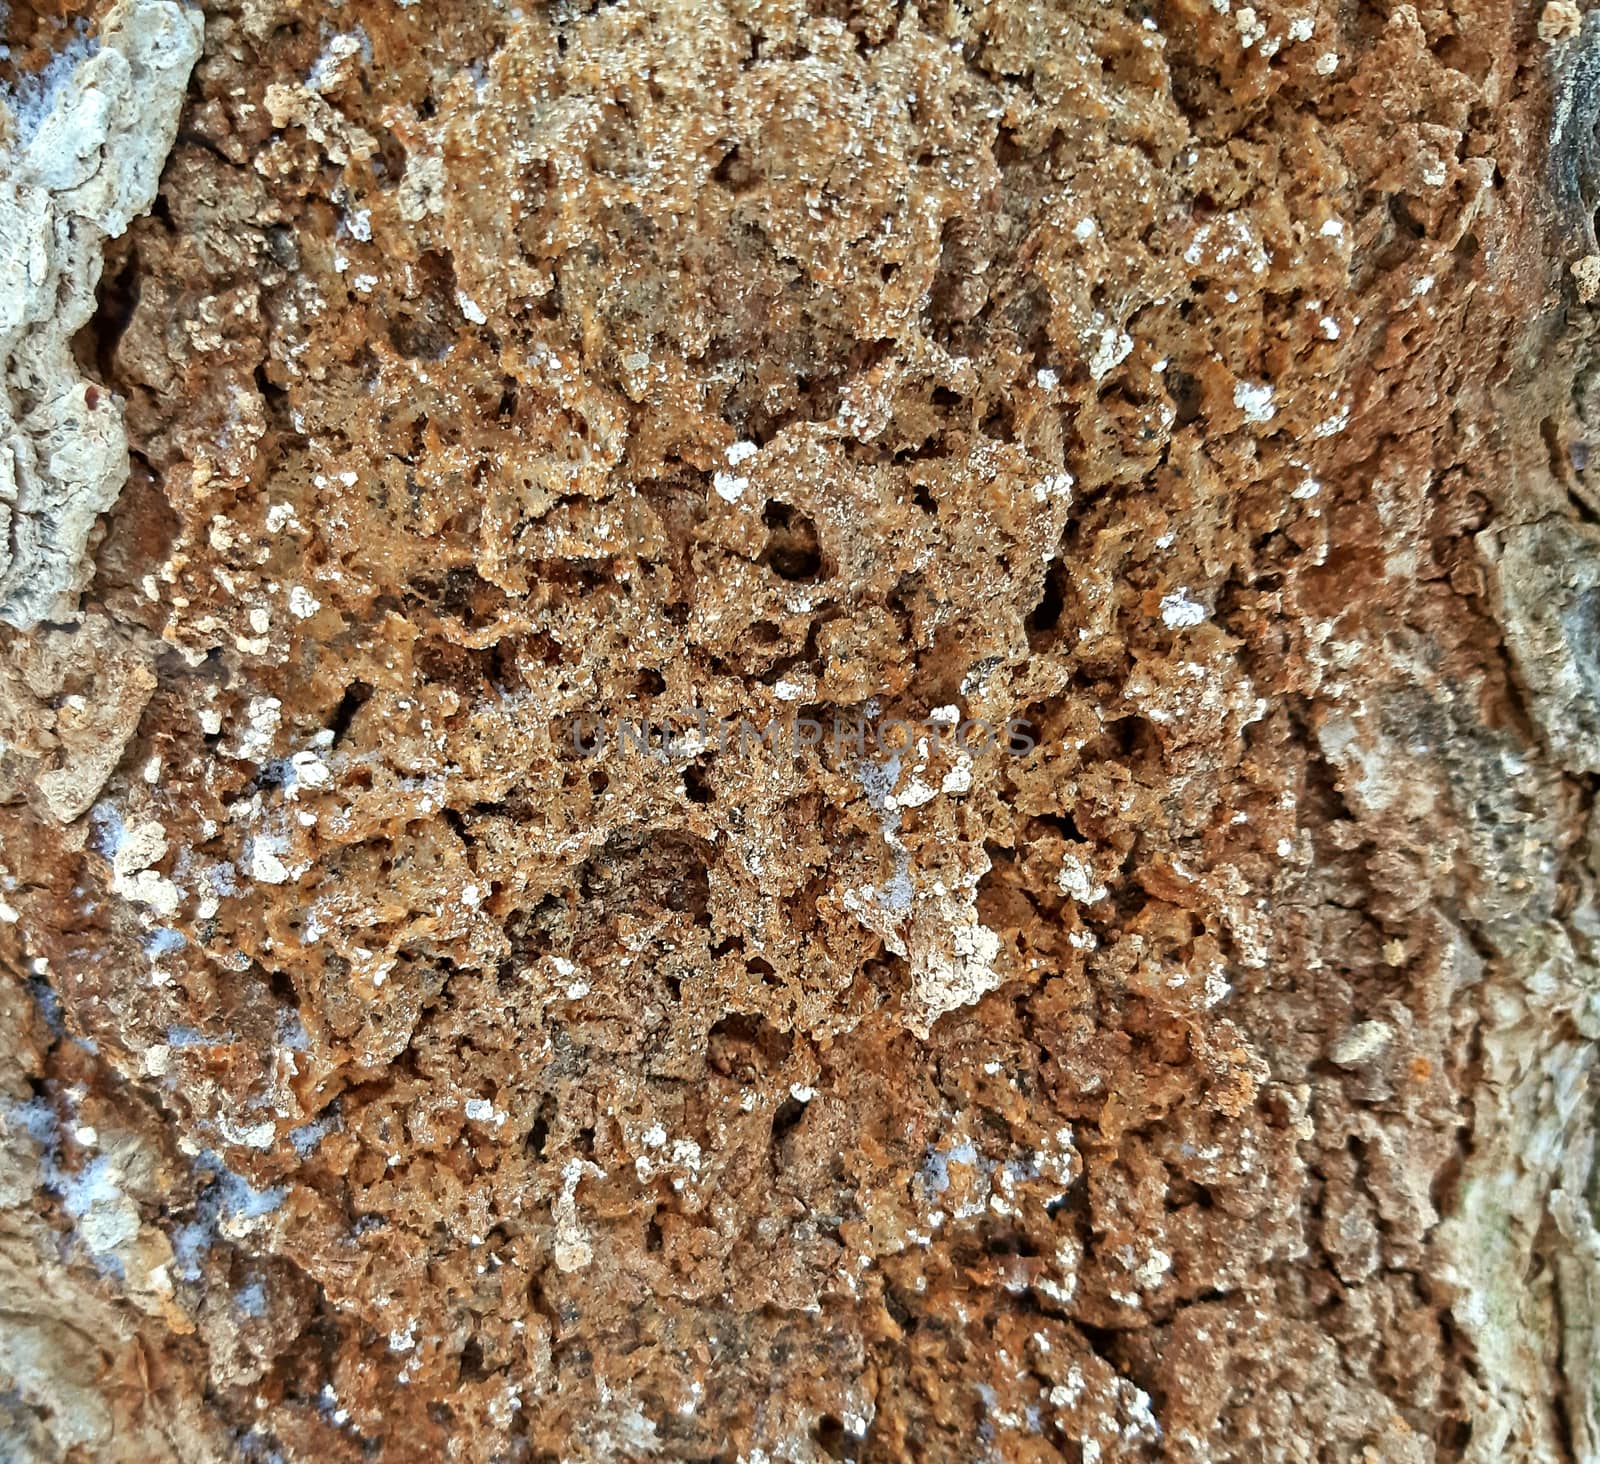 Decomposed tree bark texture, with holes